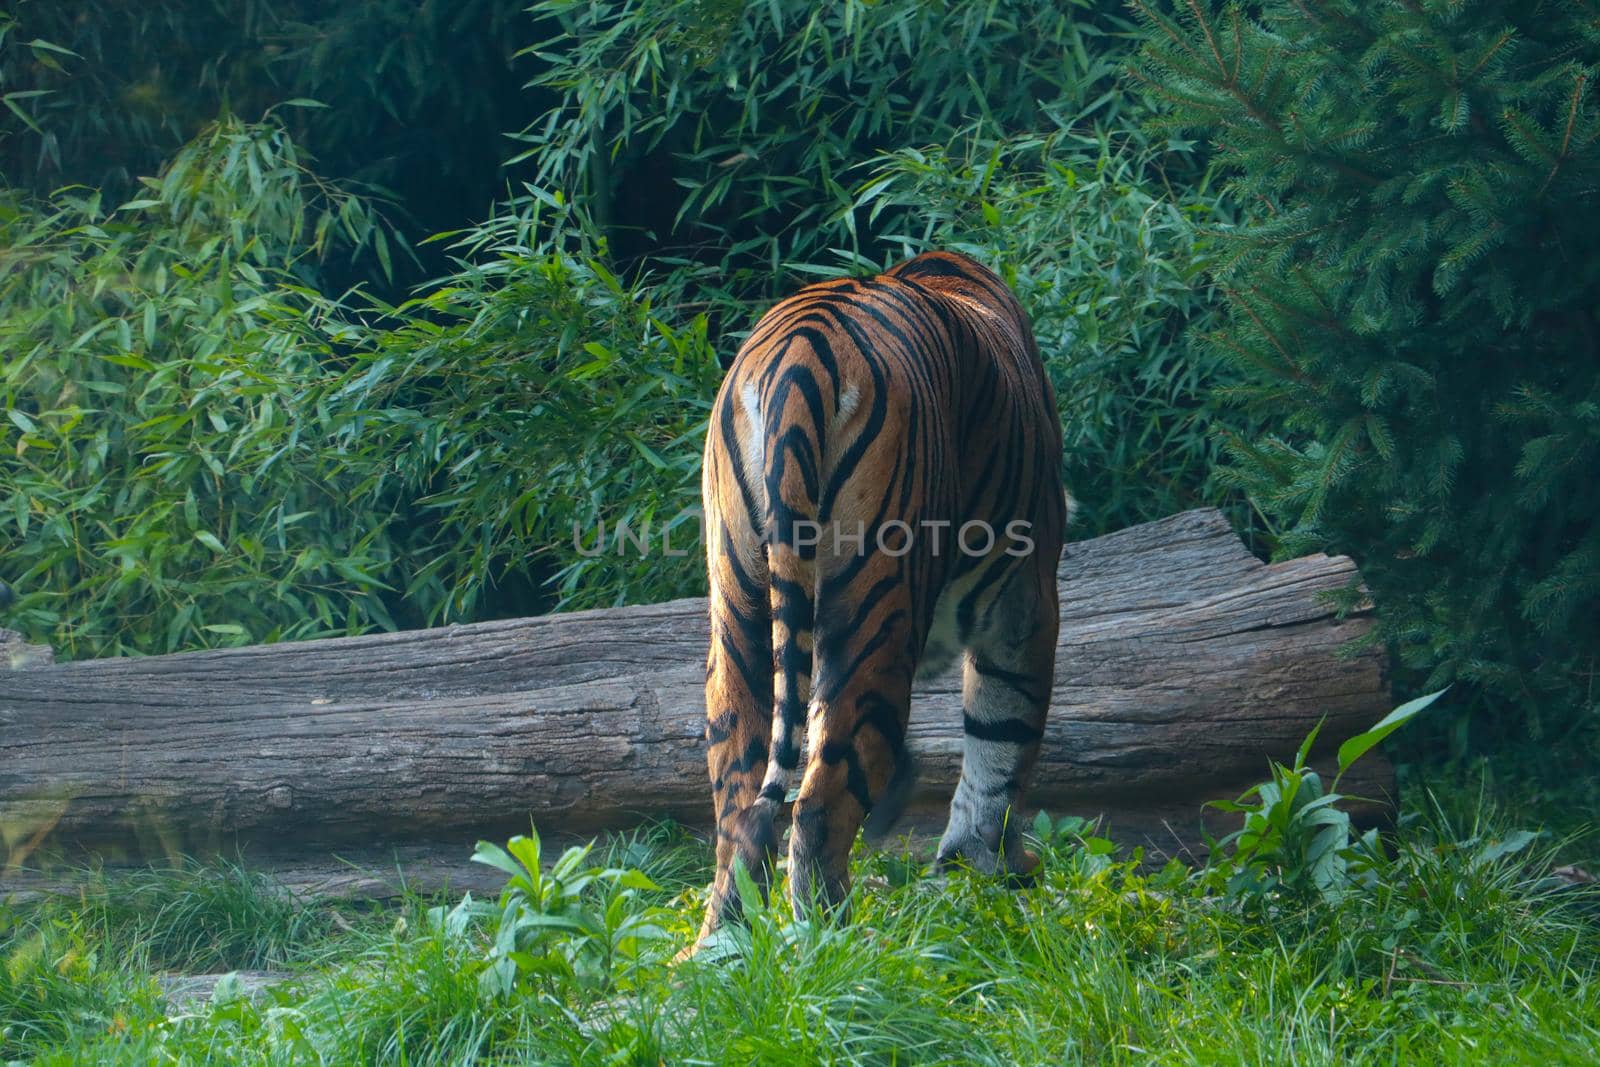 Rear view of a departing tiger in the wild. Predatory cat